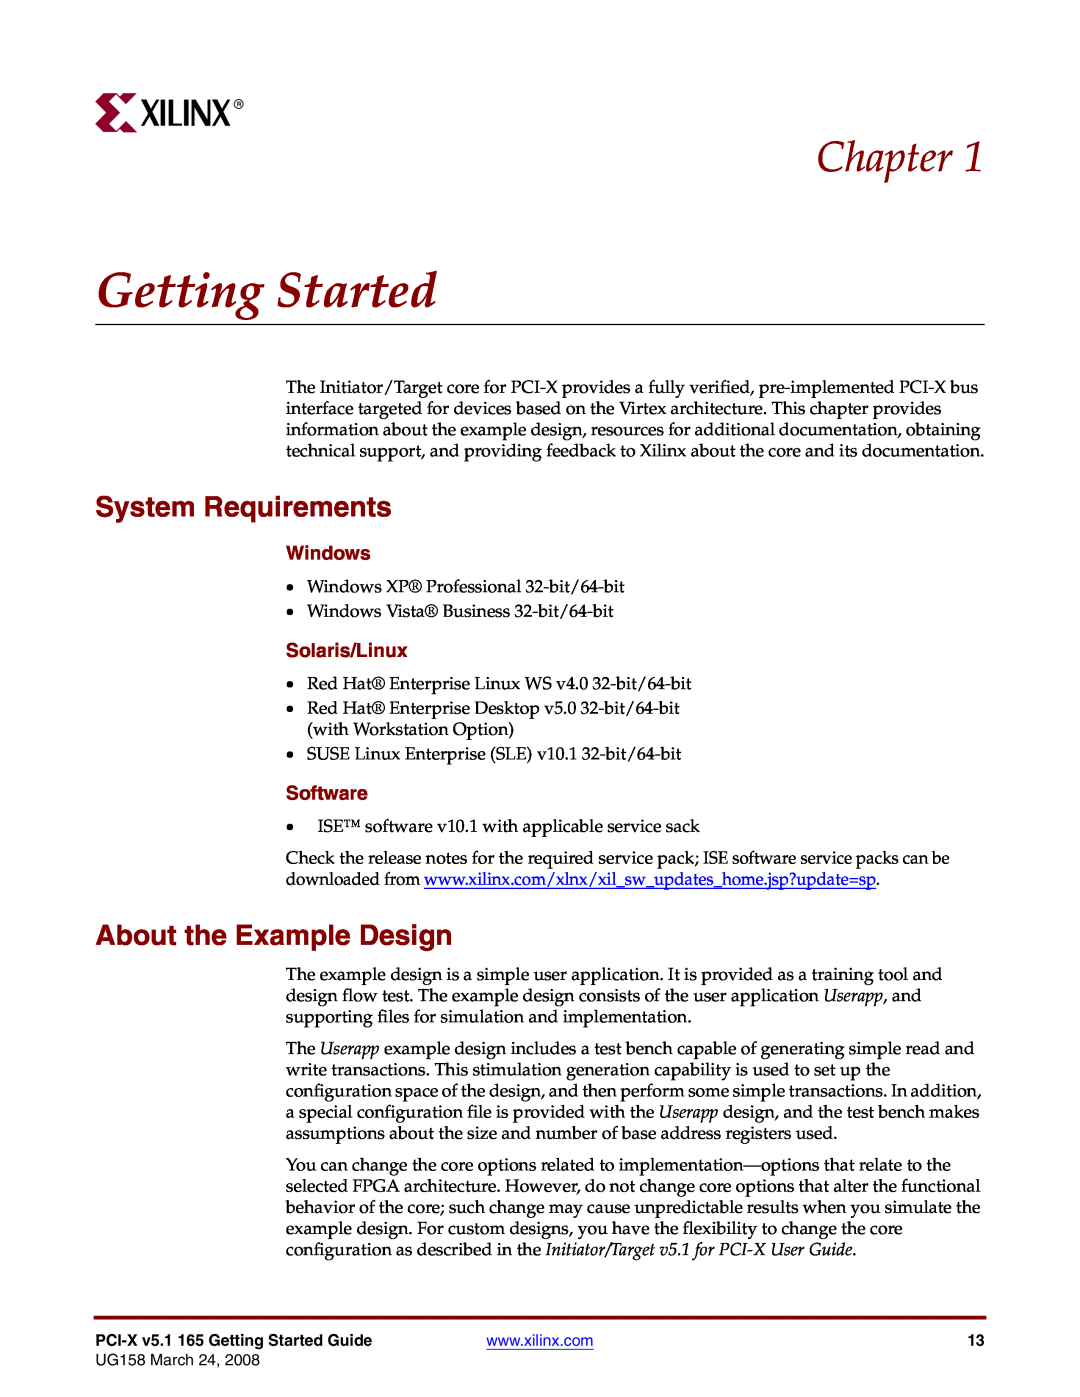 Xilinx PCI-X v5.1 manual Getting Started, Chapter, System Requirements, About the Example Design, Windows, Solaris/Linux 